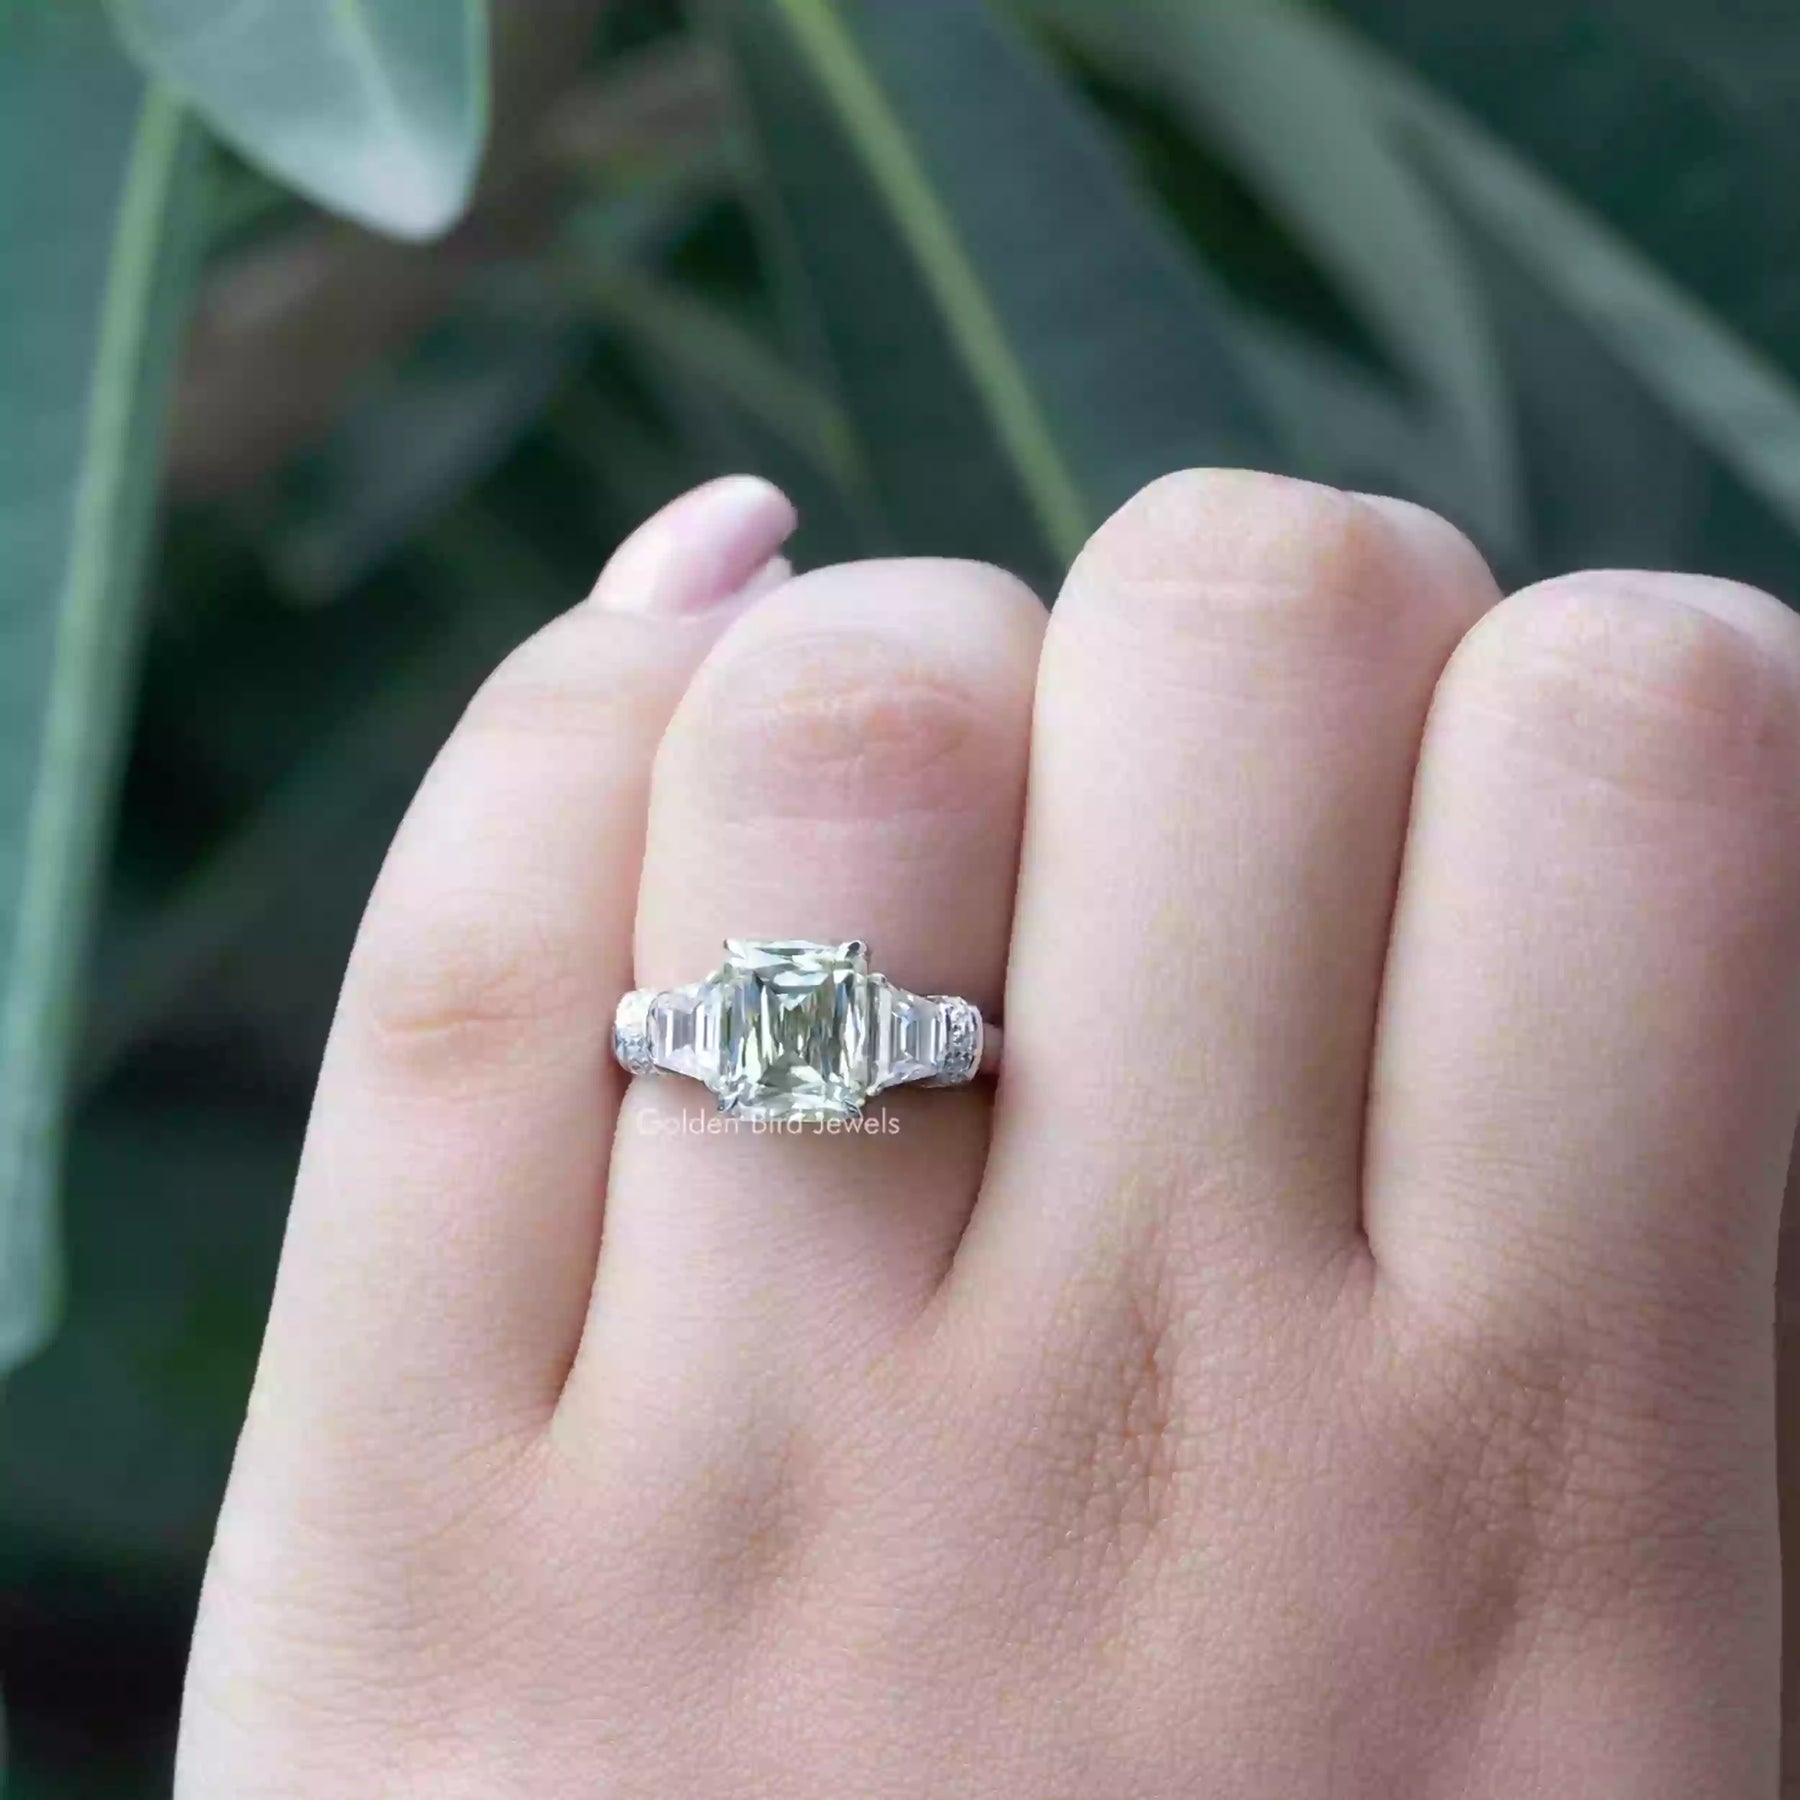 [Trapezoid And Round Cut Three Stone Engagement Ring In white Gold]-[Golden Bird Jewels]